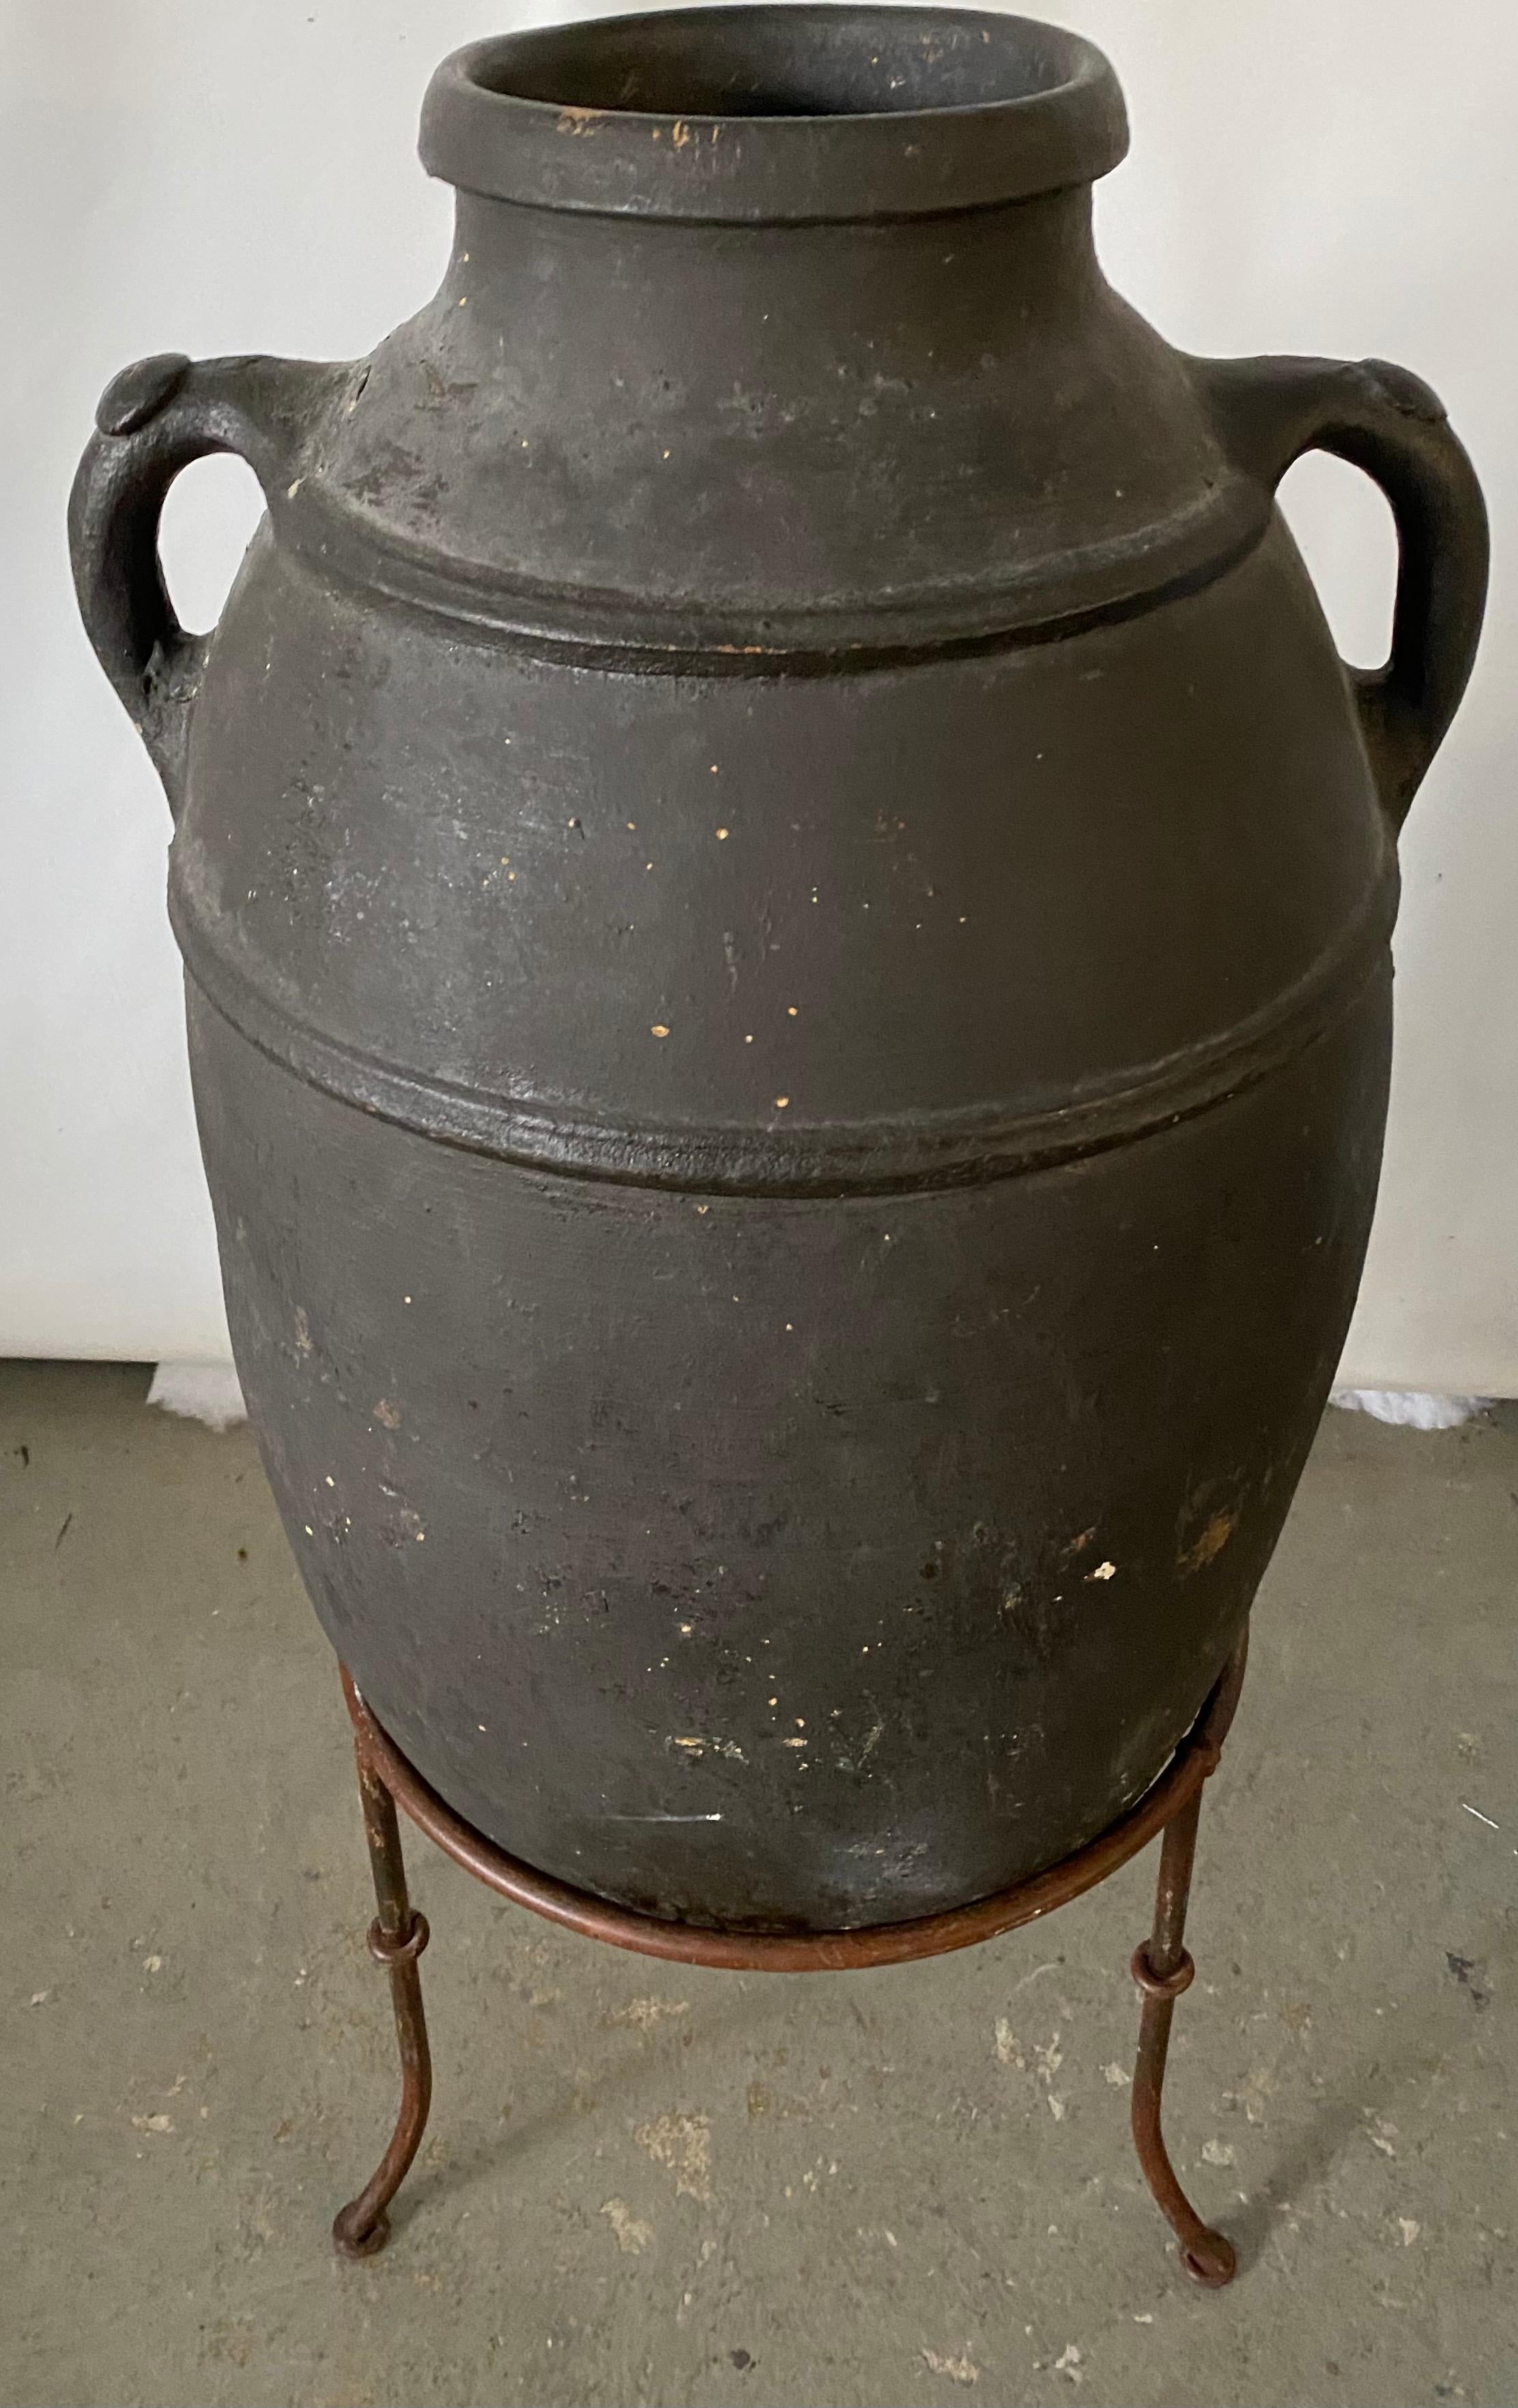 A unique piece of handmade glazed terracotta olive oil storage jar on a tripod metal Stand much like the Biot style. This type of jars were typically used for olive oil and exported around the entire Mediterranean region. It would look great outside